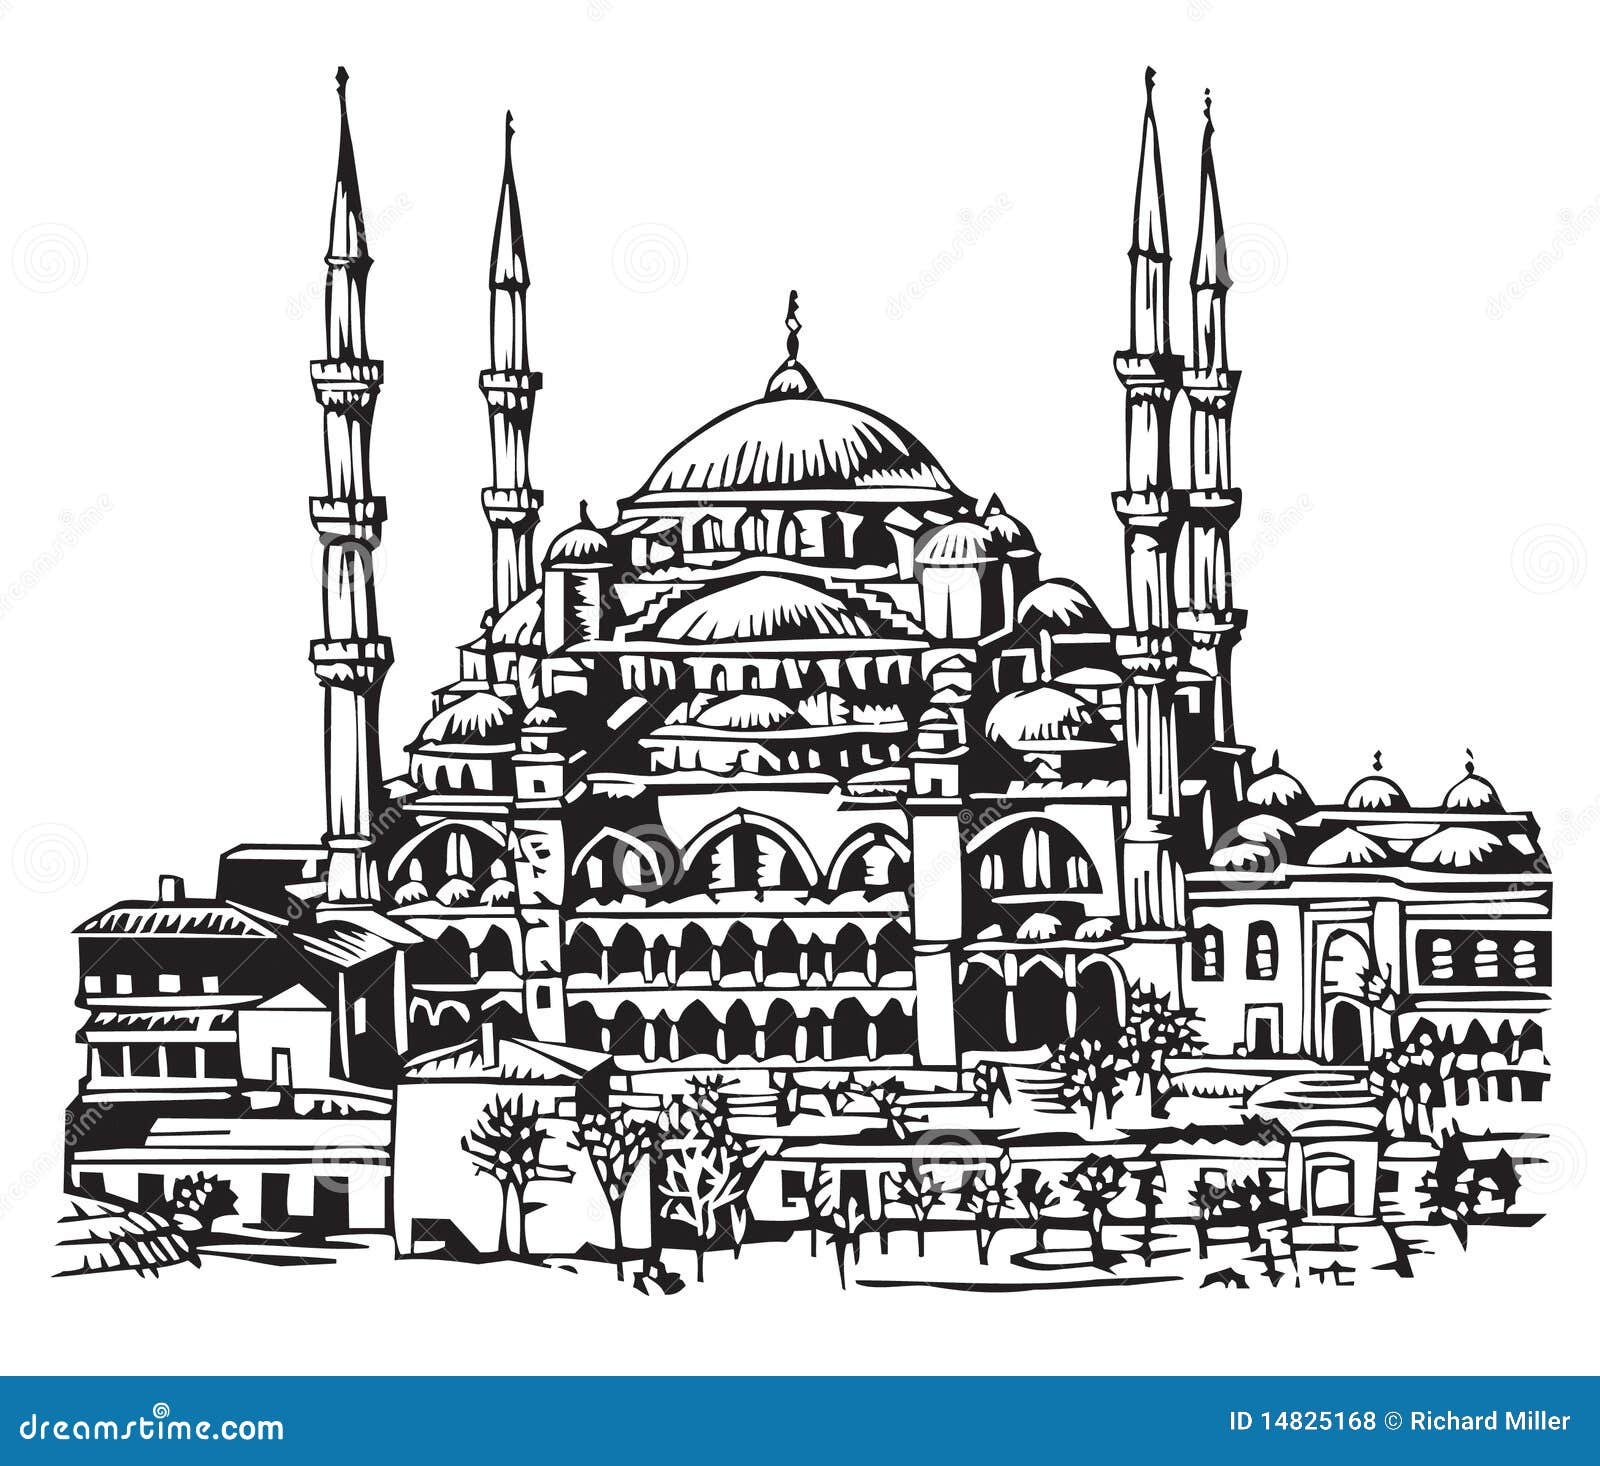 istanbul clipart free - photo #9